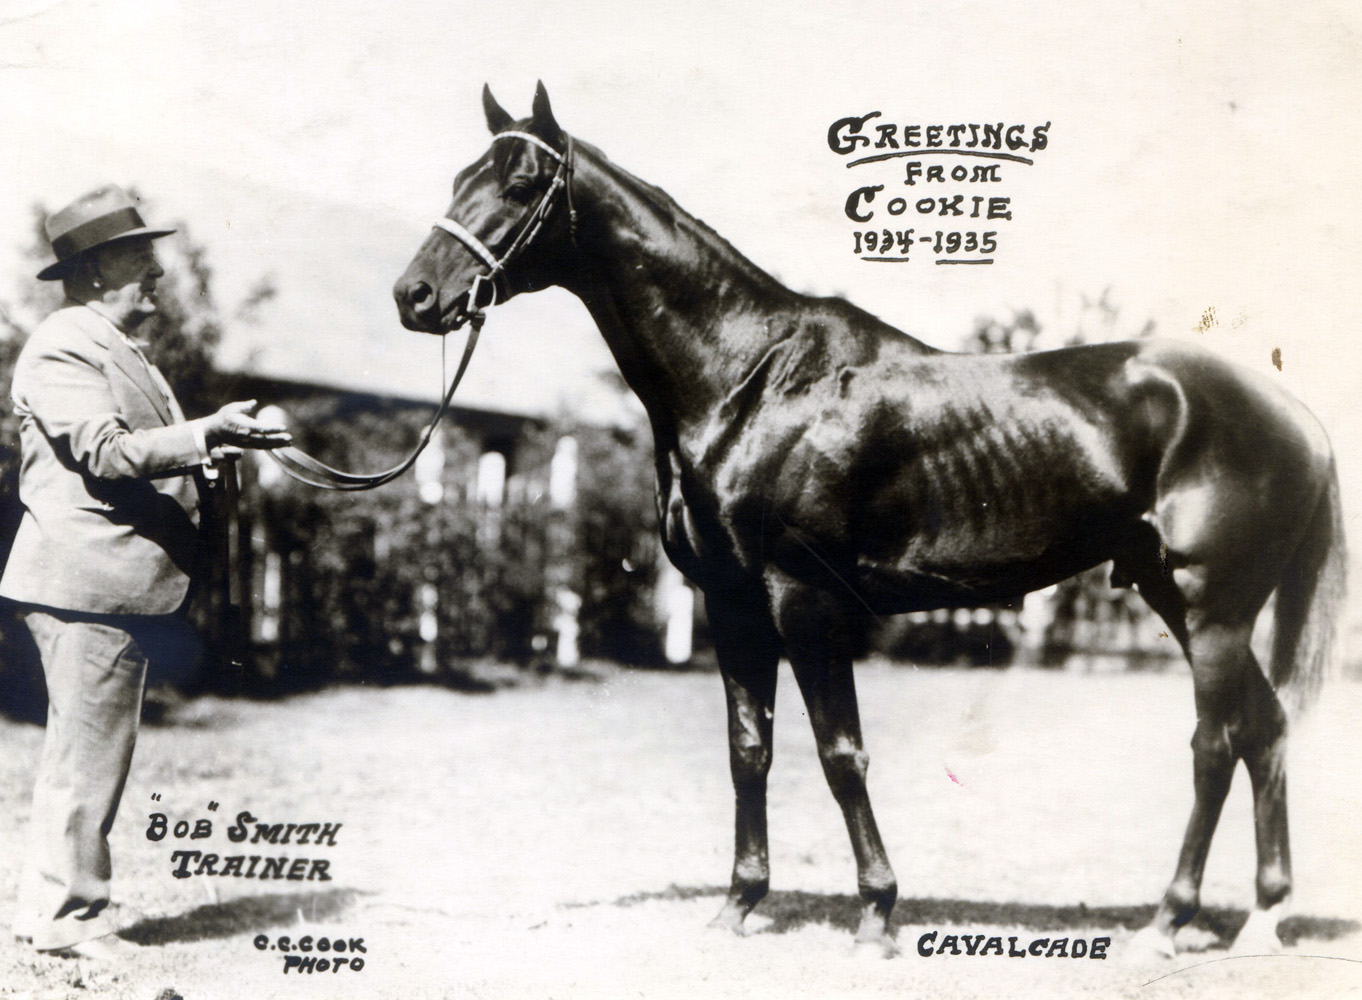 Cavalcade and trainer Robert Smith featured in the 1934 "Christmas Cookie" greeting card produced by photographer C. C. Cook (C. C. Cook/Museum Collection)